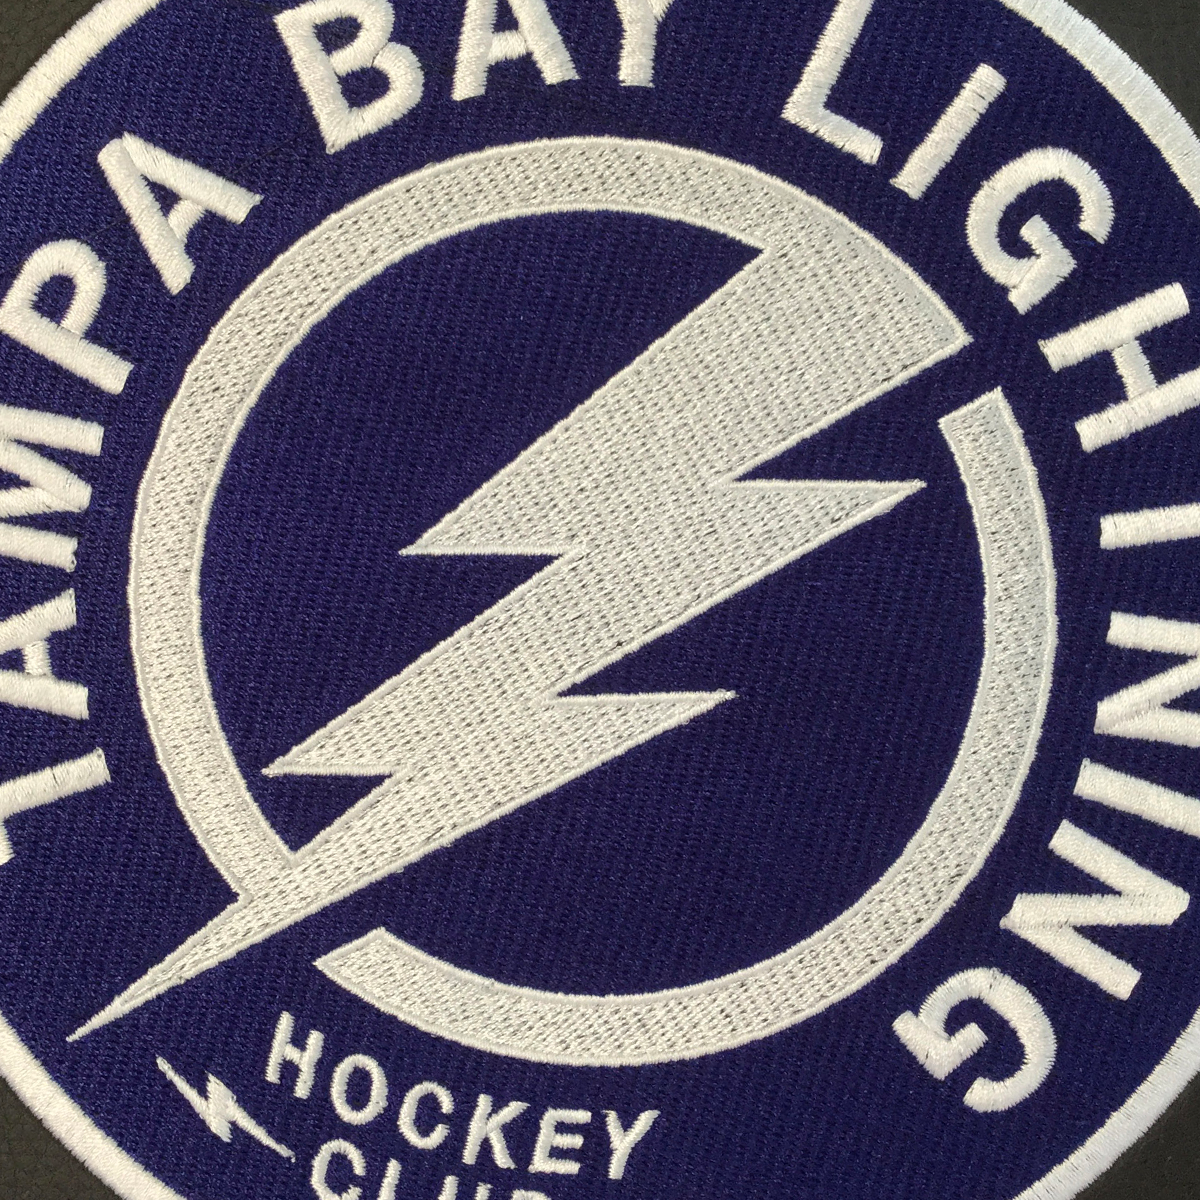 Silver Club Chair with Tampa Bay Lightning Alternate Logo